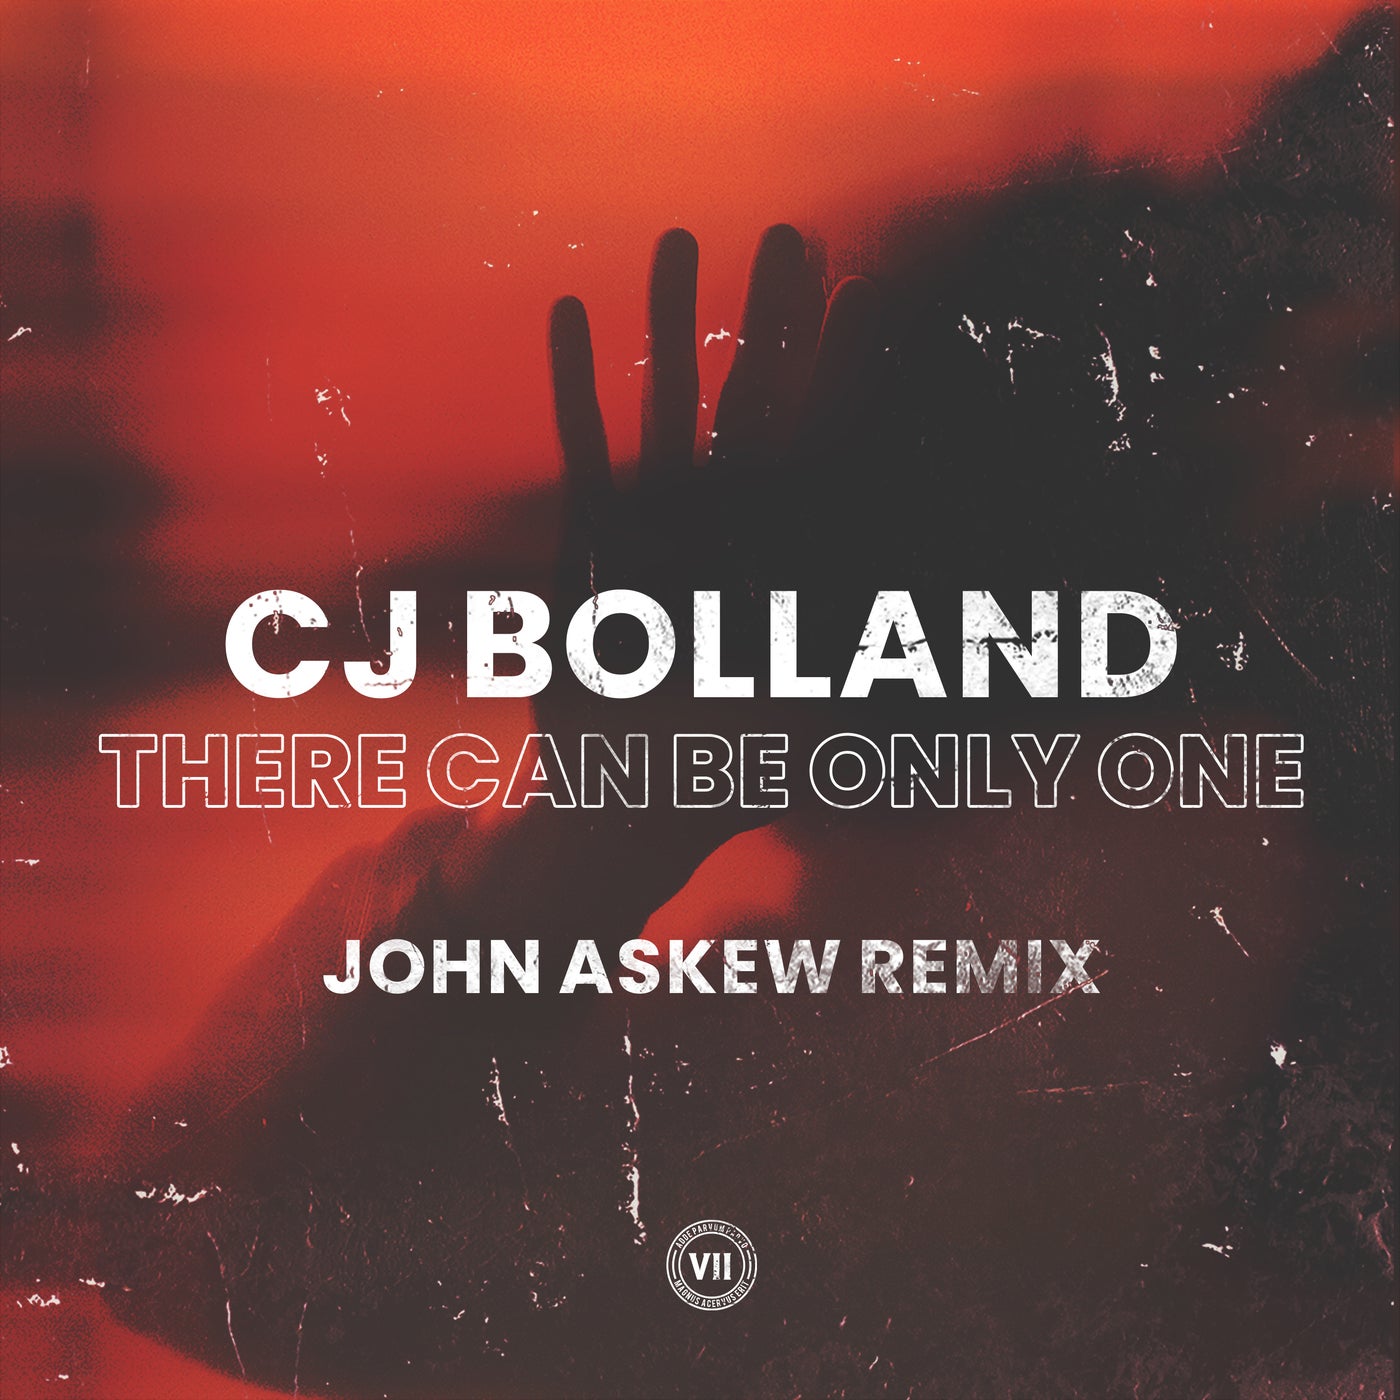 There Can Be Only One - John Askew Remix